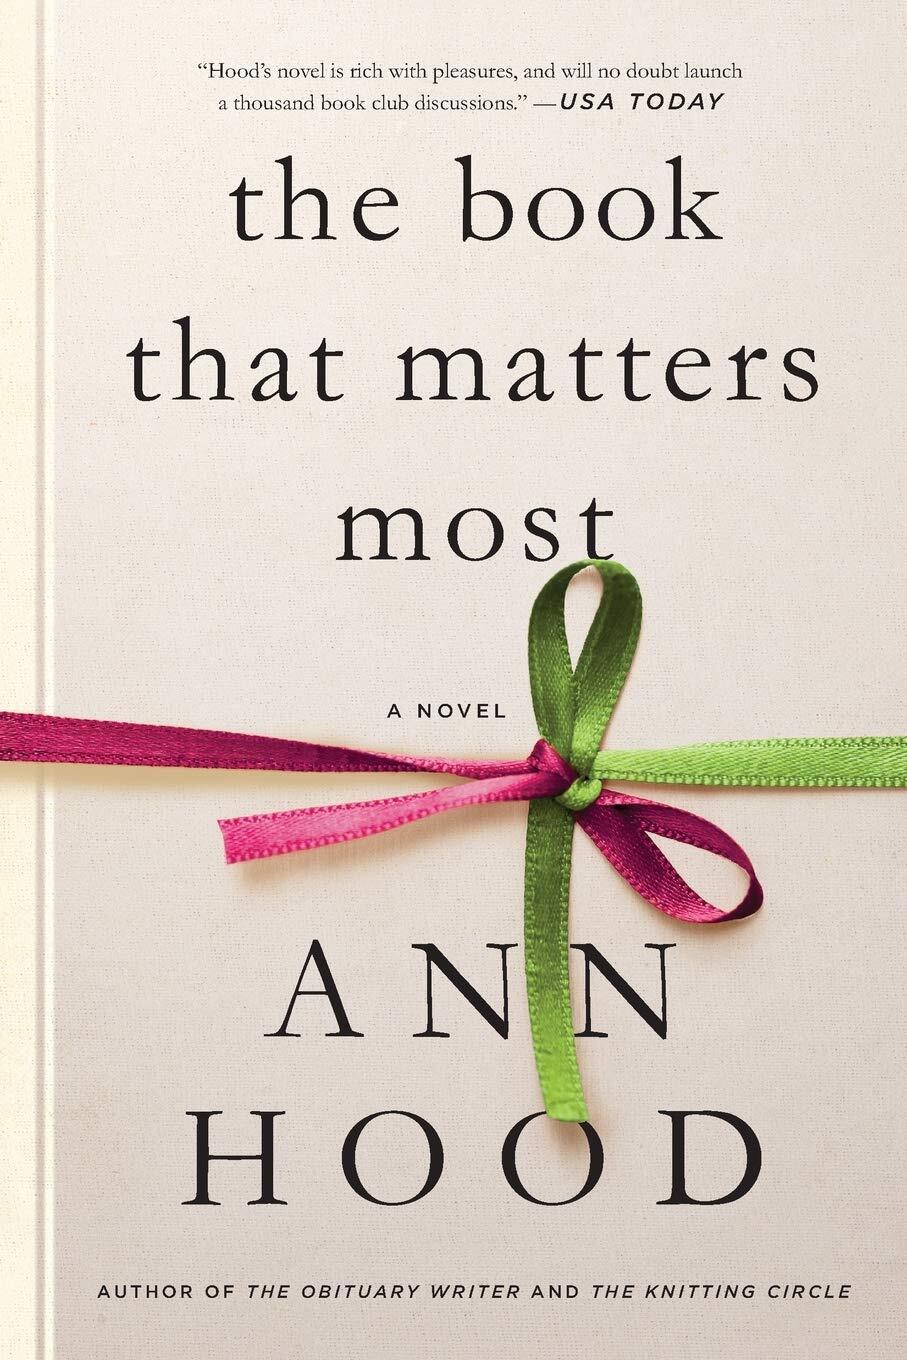 Ann Hood’s “The Book That Matters Most” is the No. 1 bestselling fiction and nonfiction book in Petaluma this week.